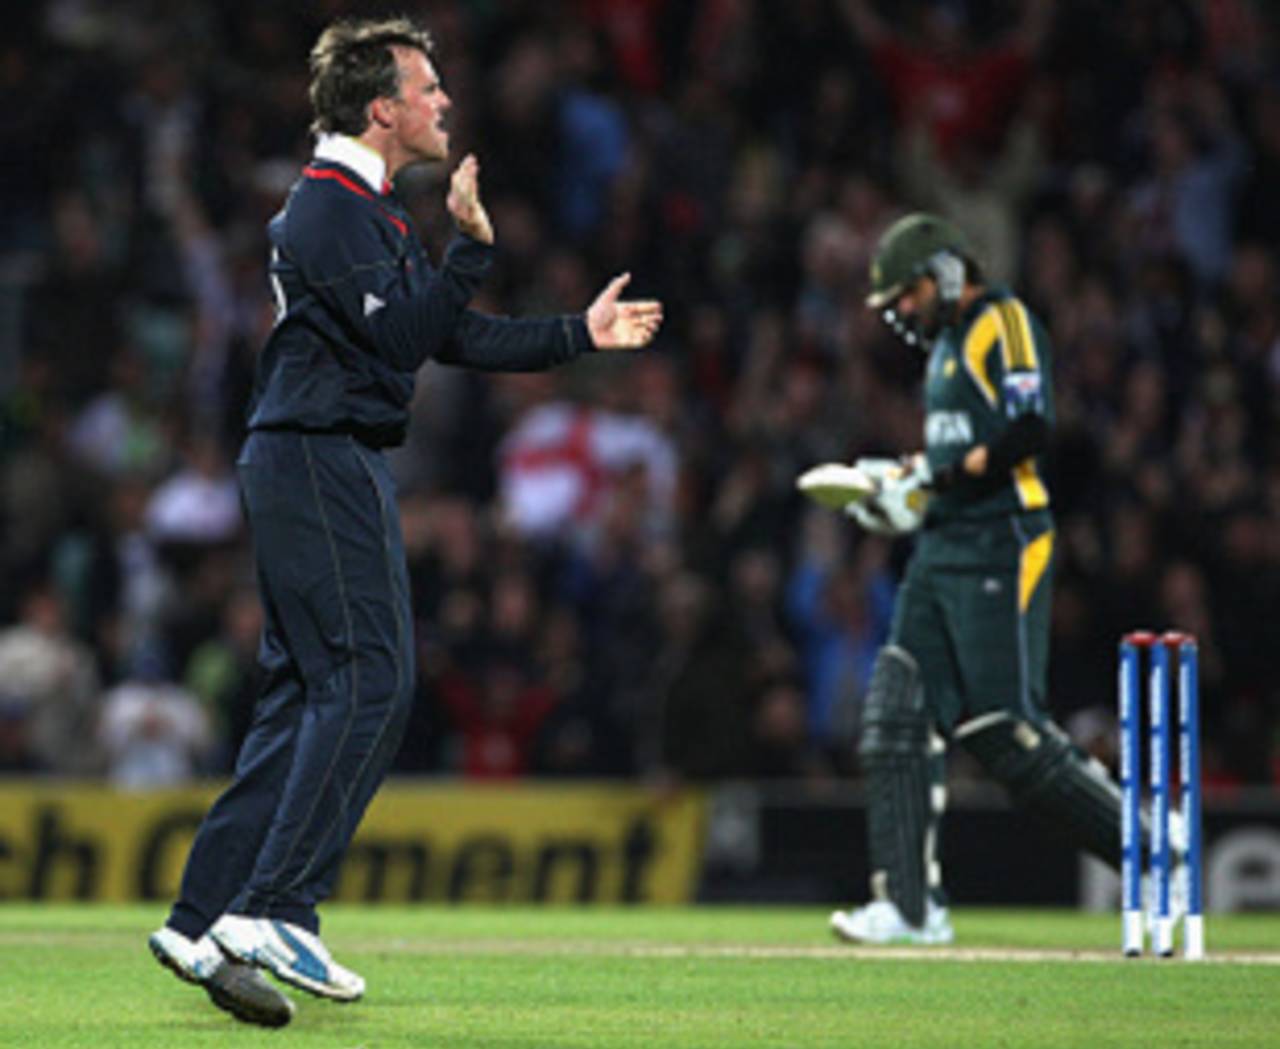 Hugh Morris believes the two matches will help in preparations for the 2010 World Twenty20&nbsp;&nbsp;&bull;&nbsp;&nbsp;Getty Images